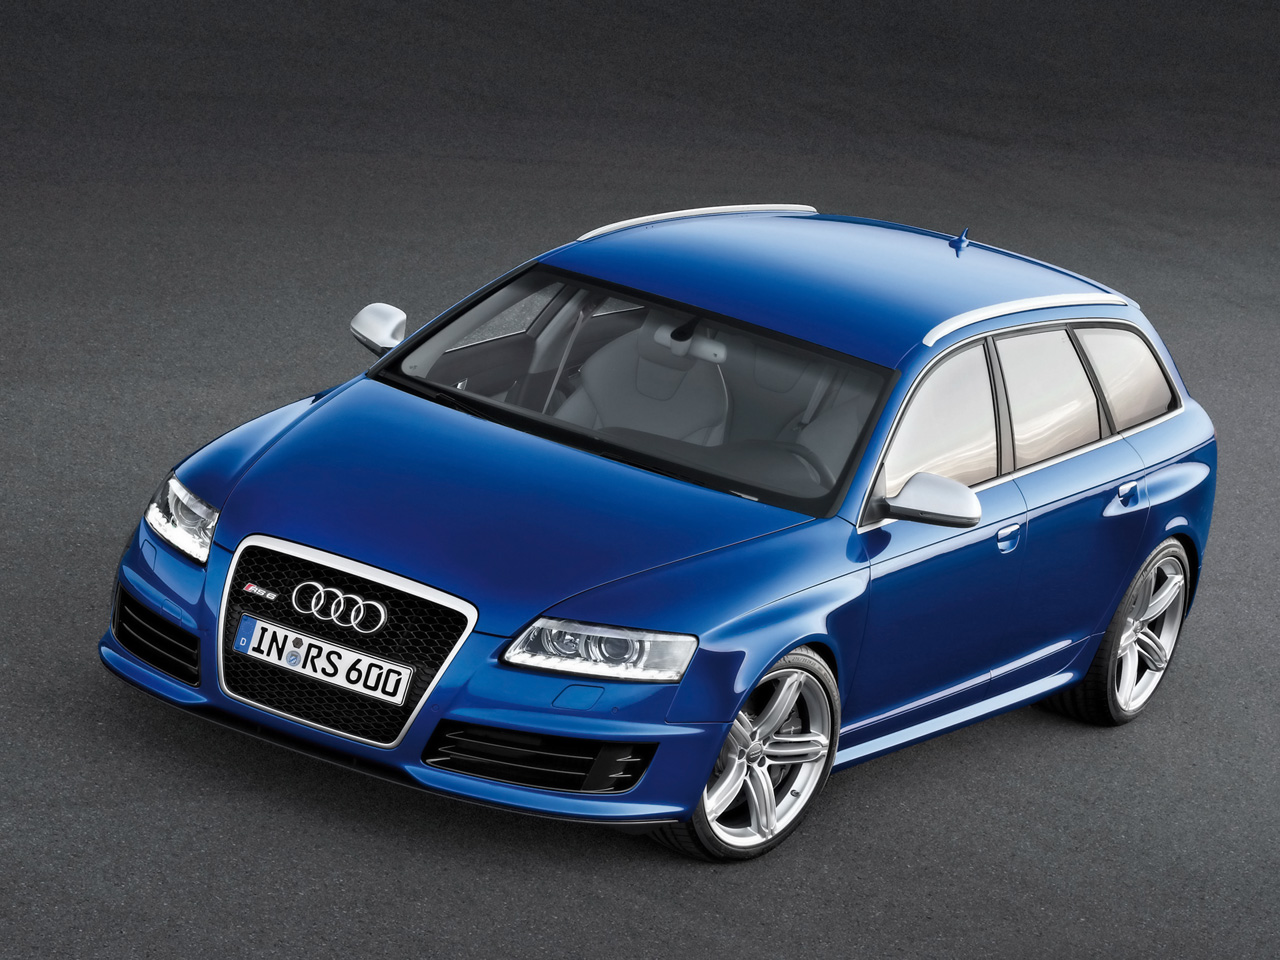 [2008-Audi-RS-6-Avant-Front-And-Side-1280x960.jpg]